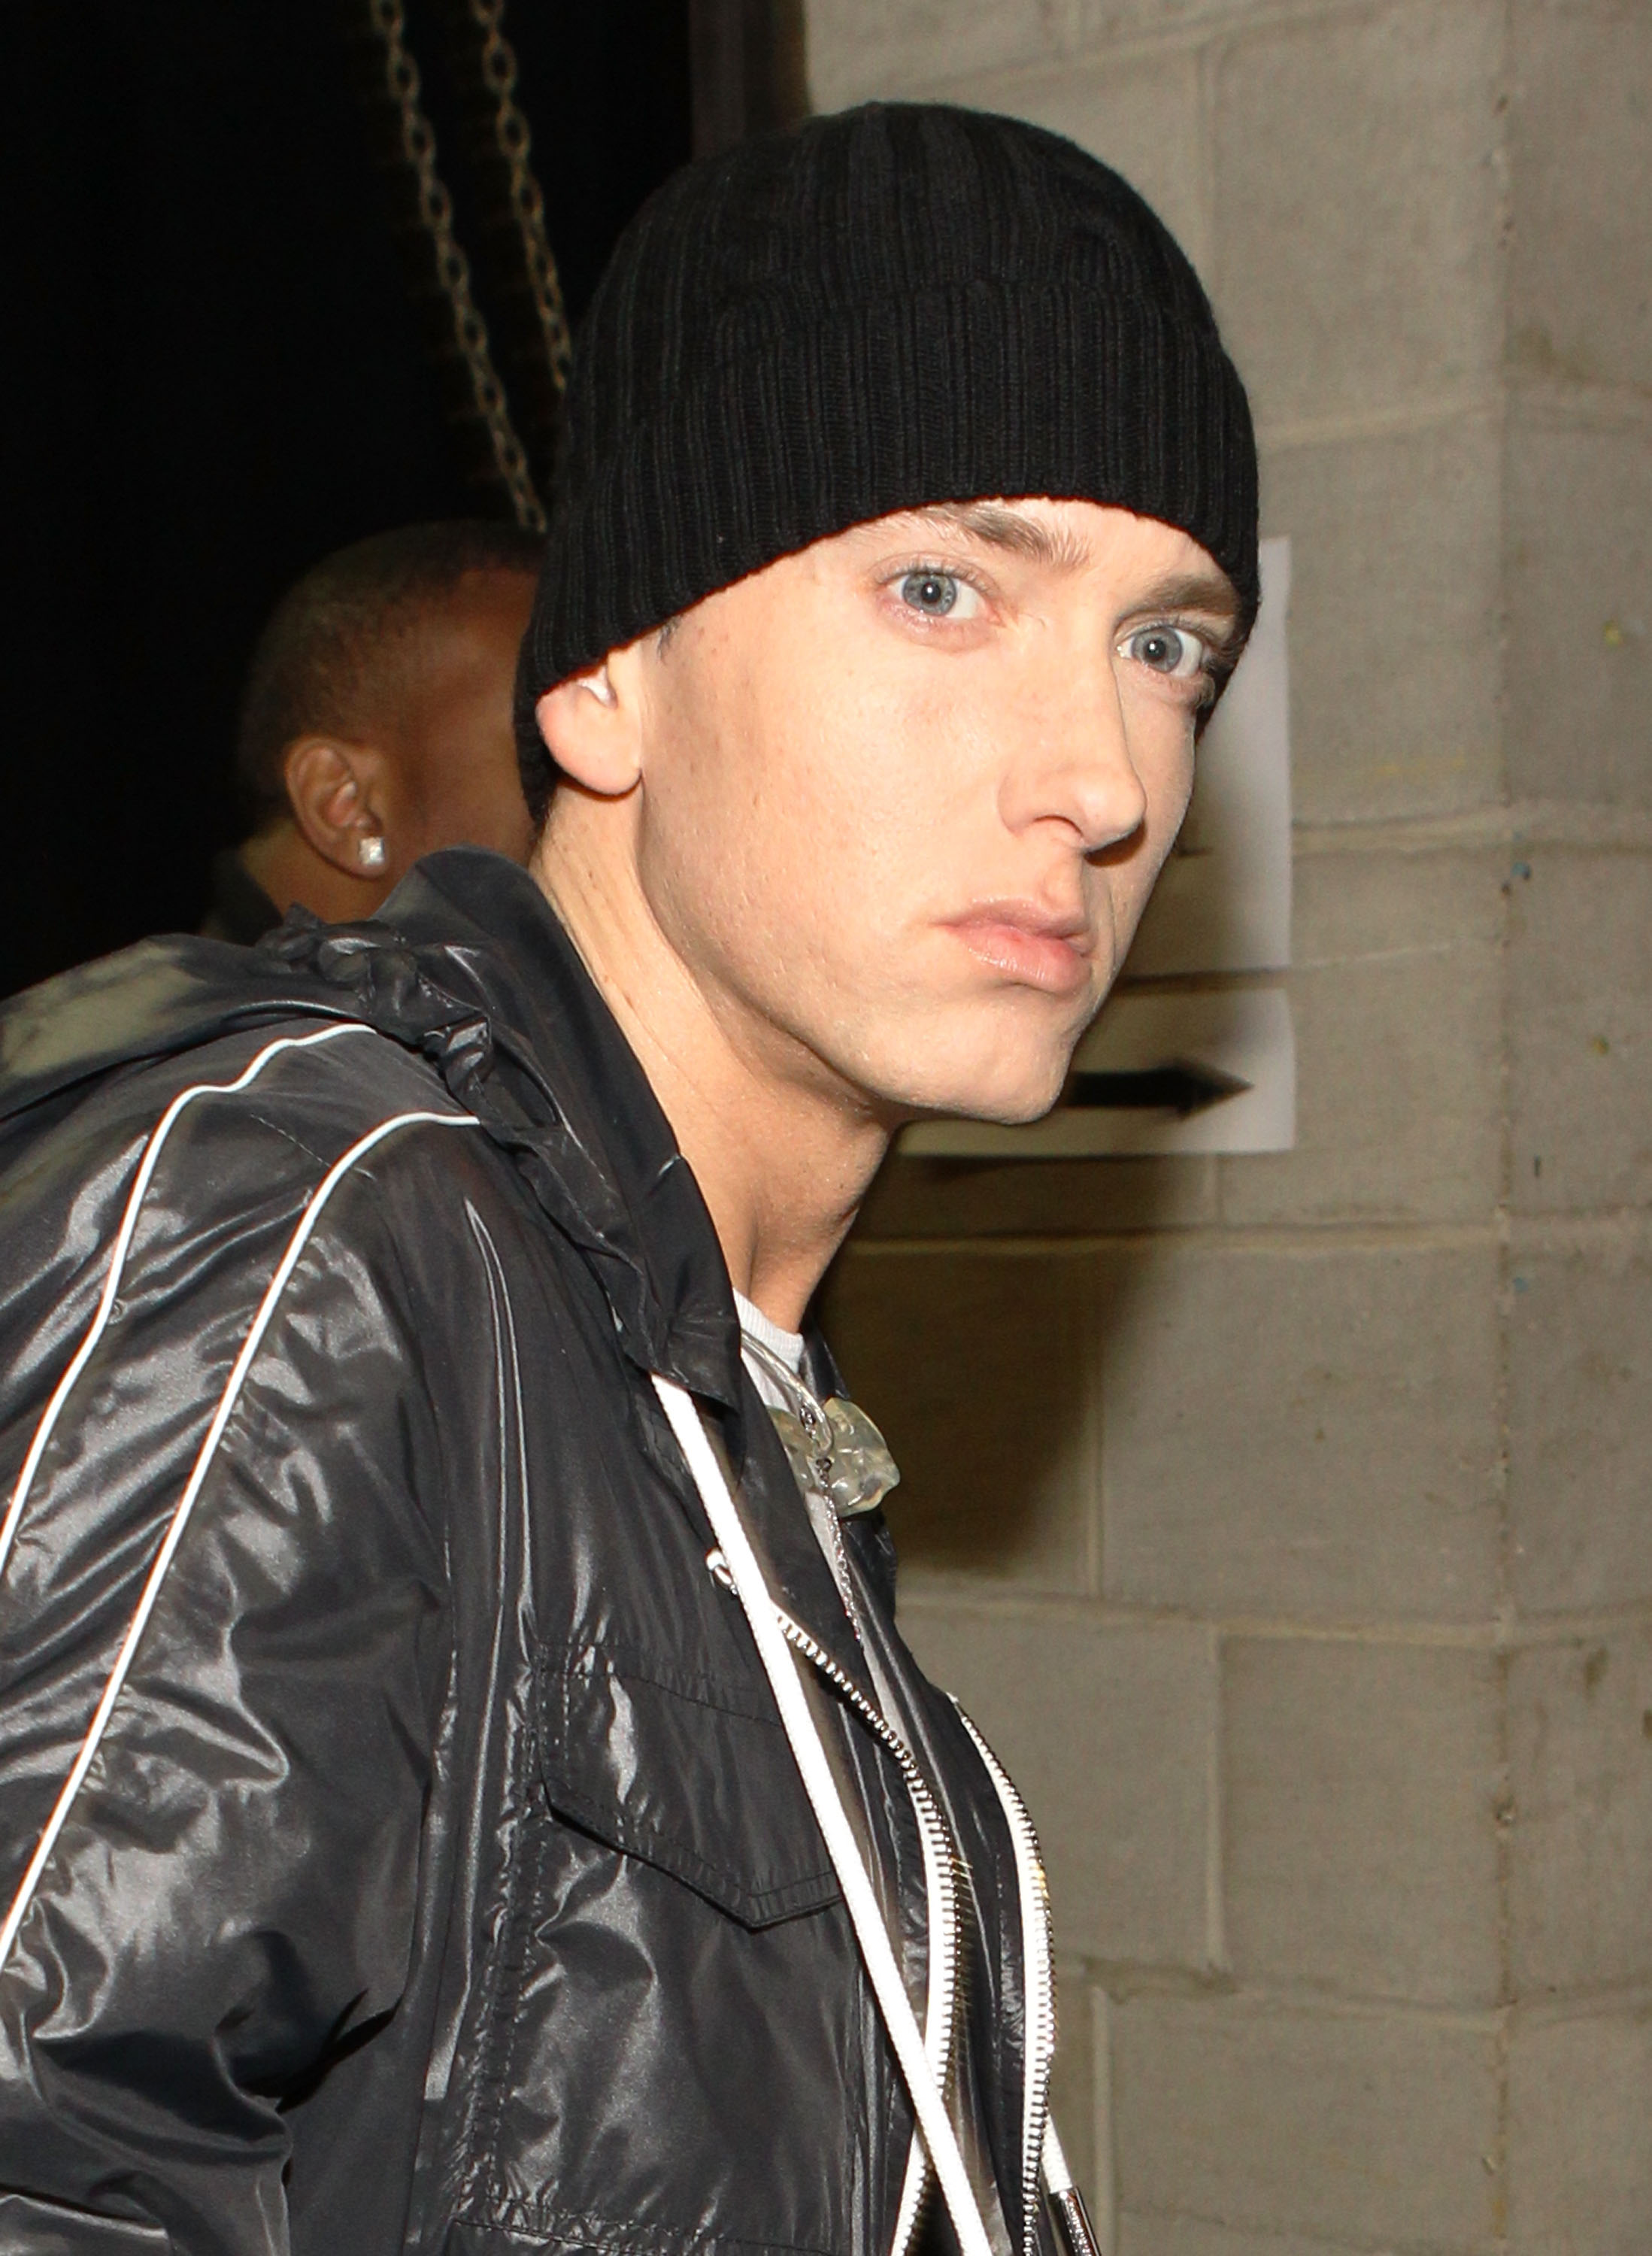 Eminem during the 52nd Annual Grammy Awards on January 31, 2010 in Los Angeles, California. | Source: Getty Images